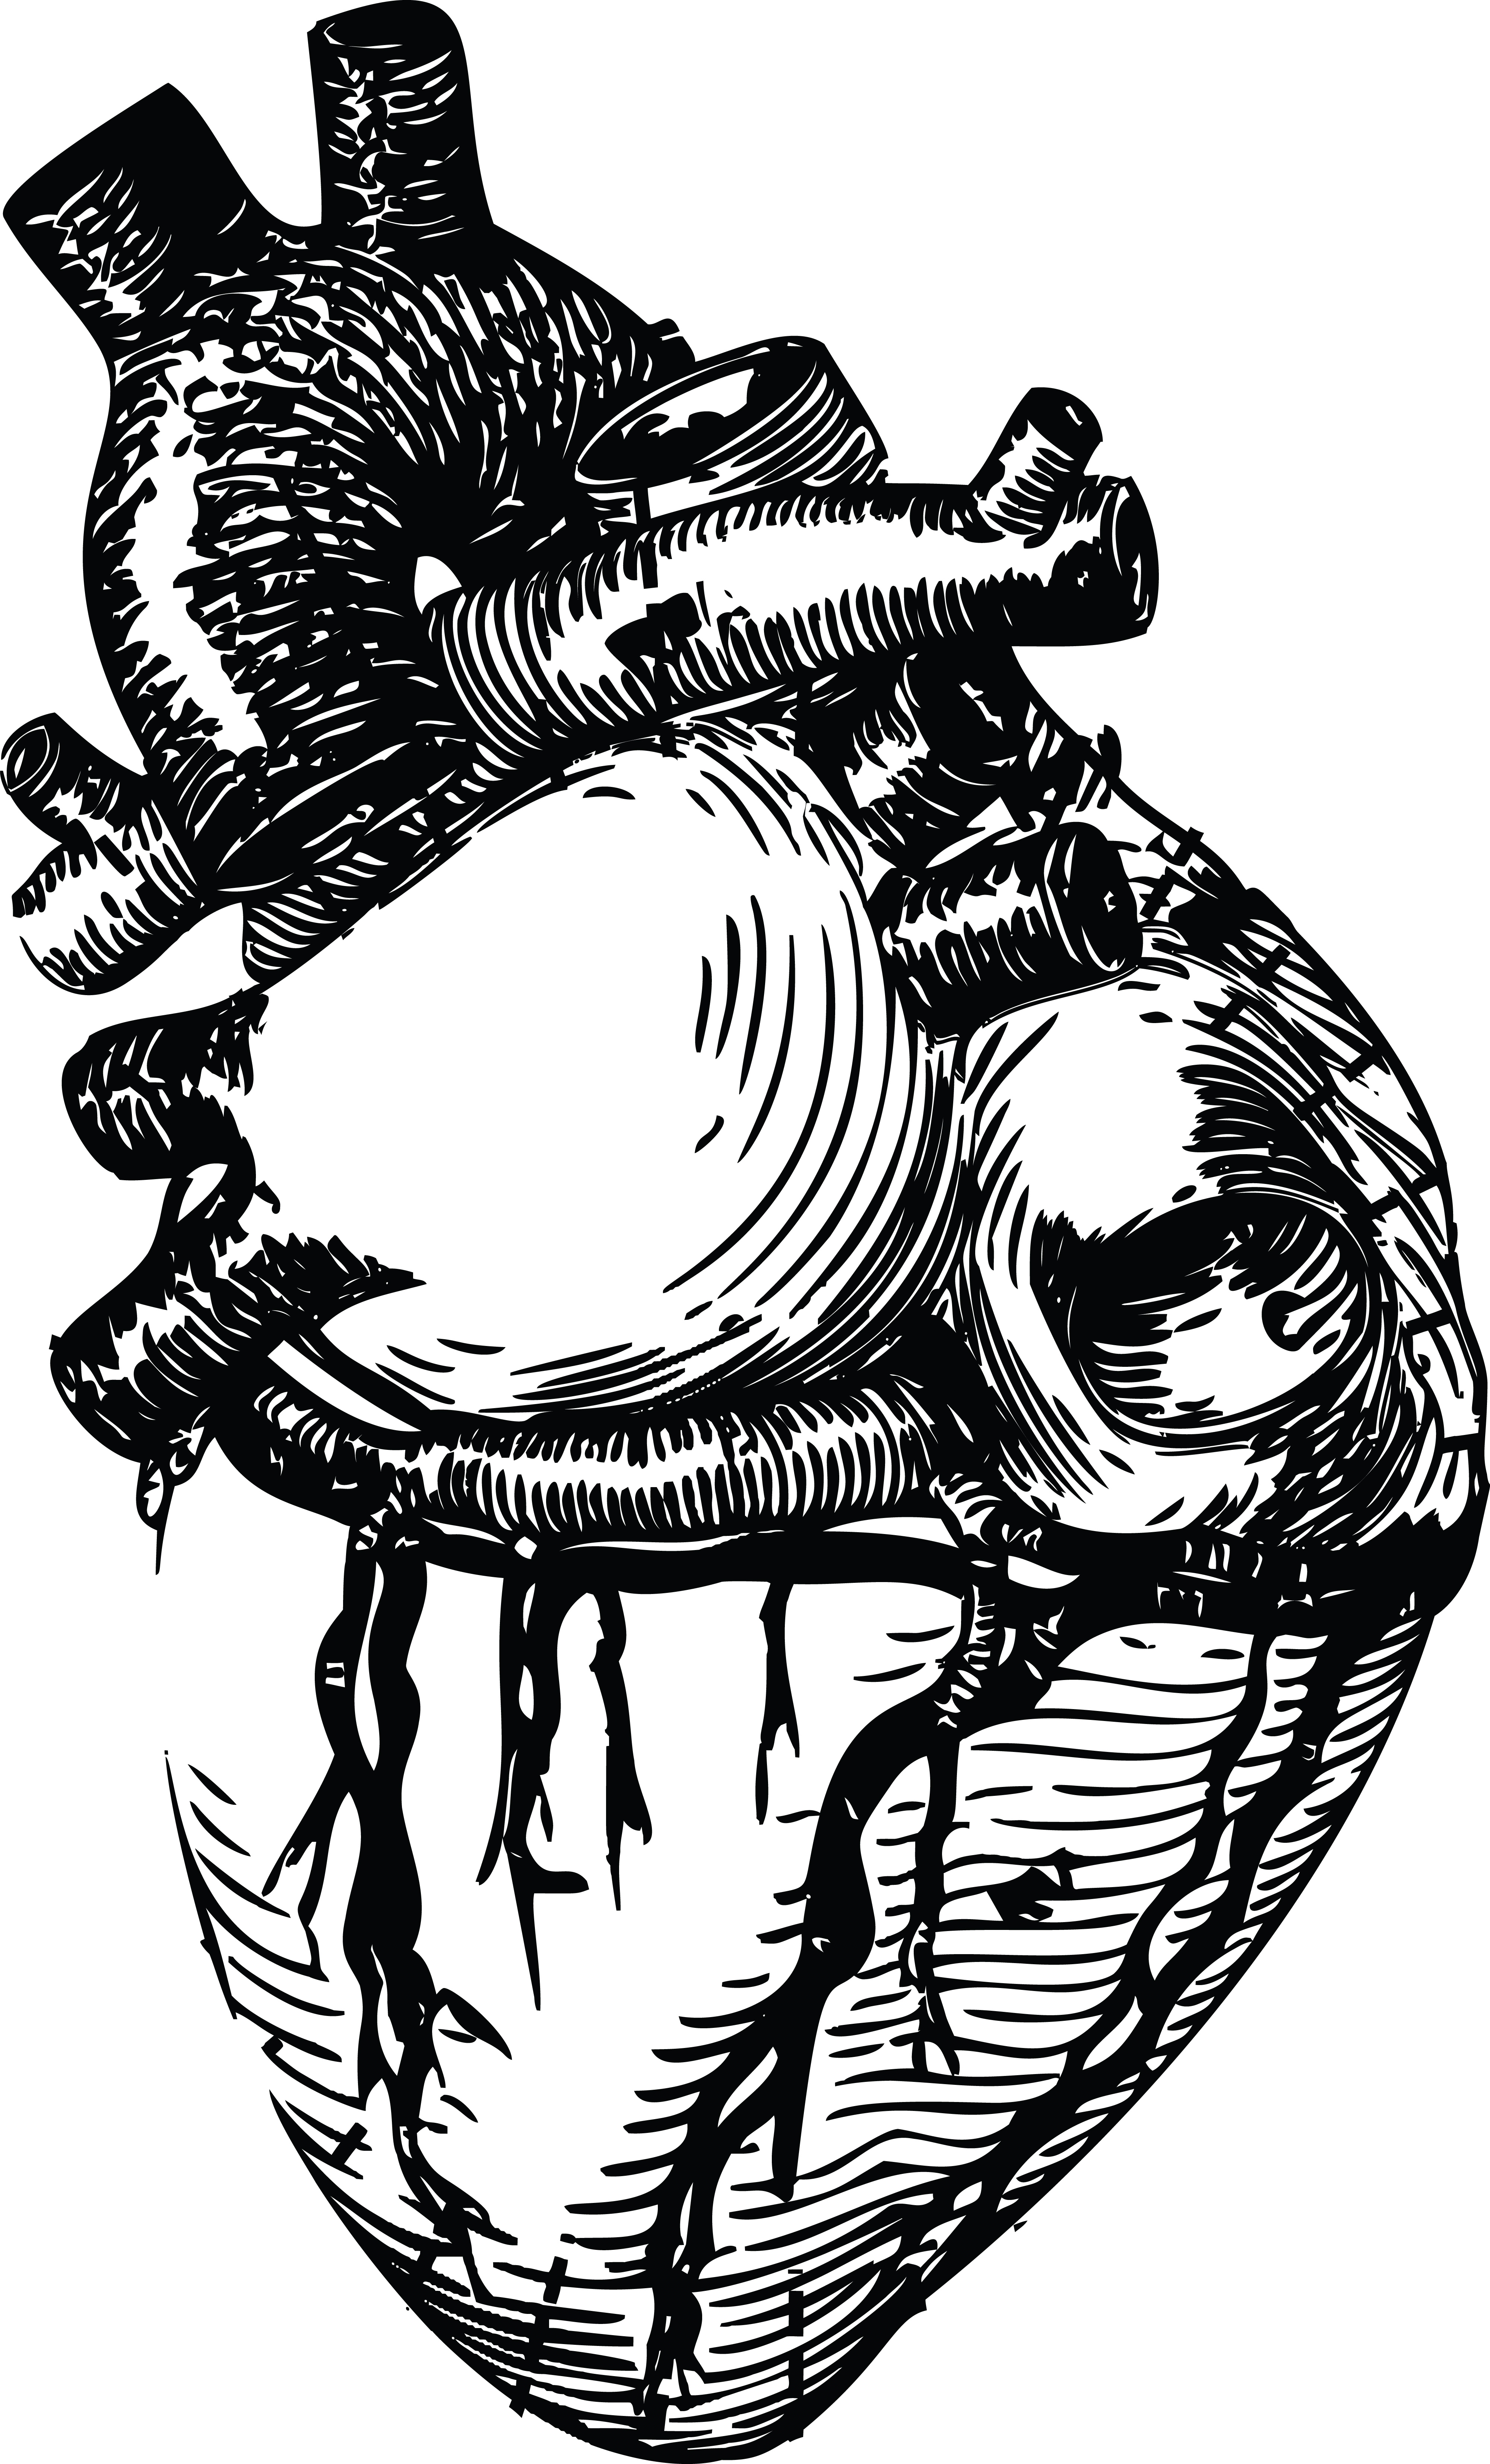 human heart black and white drawing